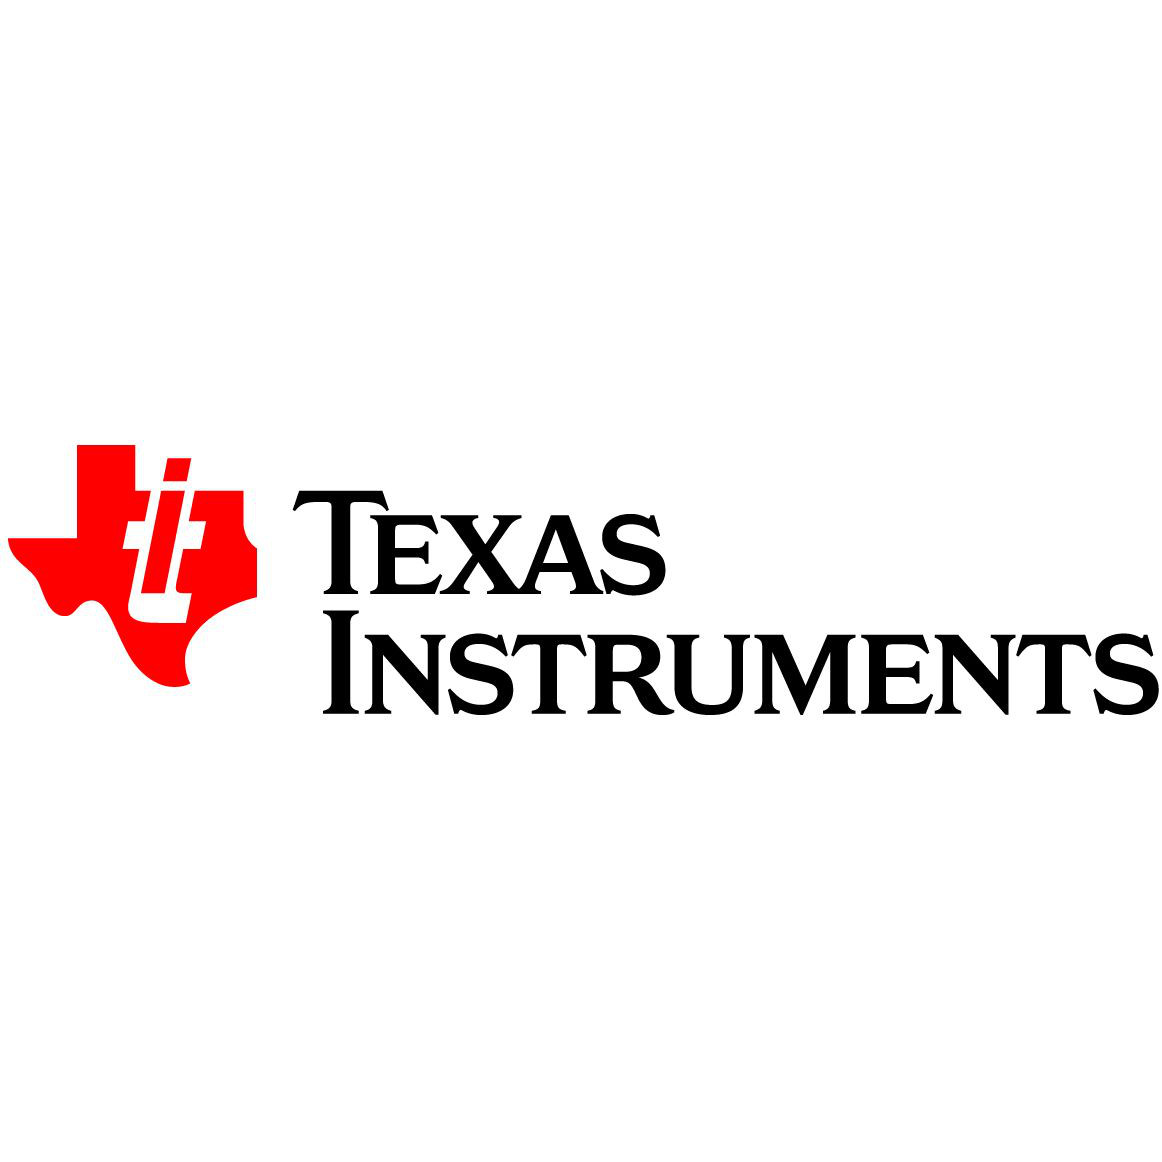 Texas Instruments Releases Sensor Tag App and SDK for Developers